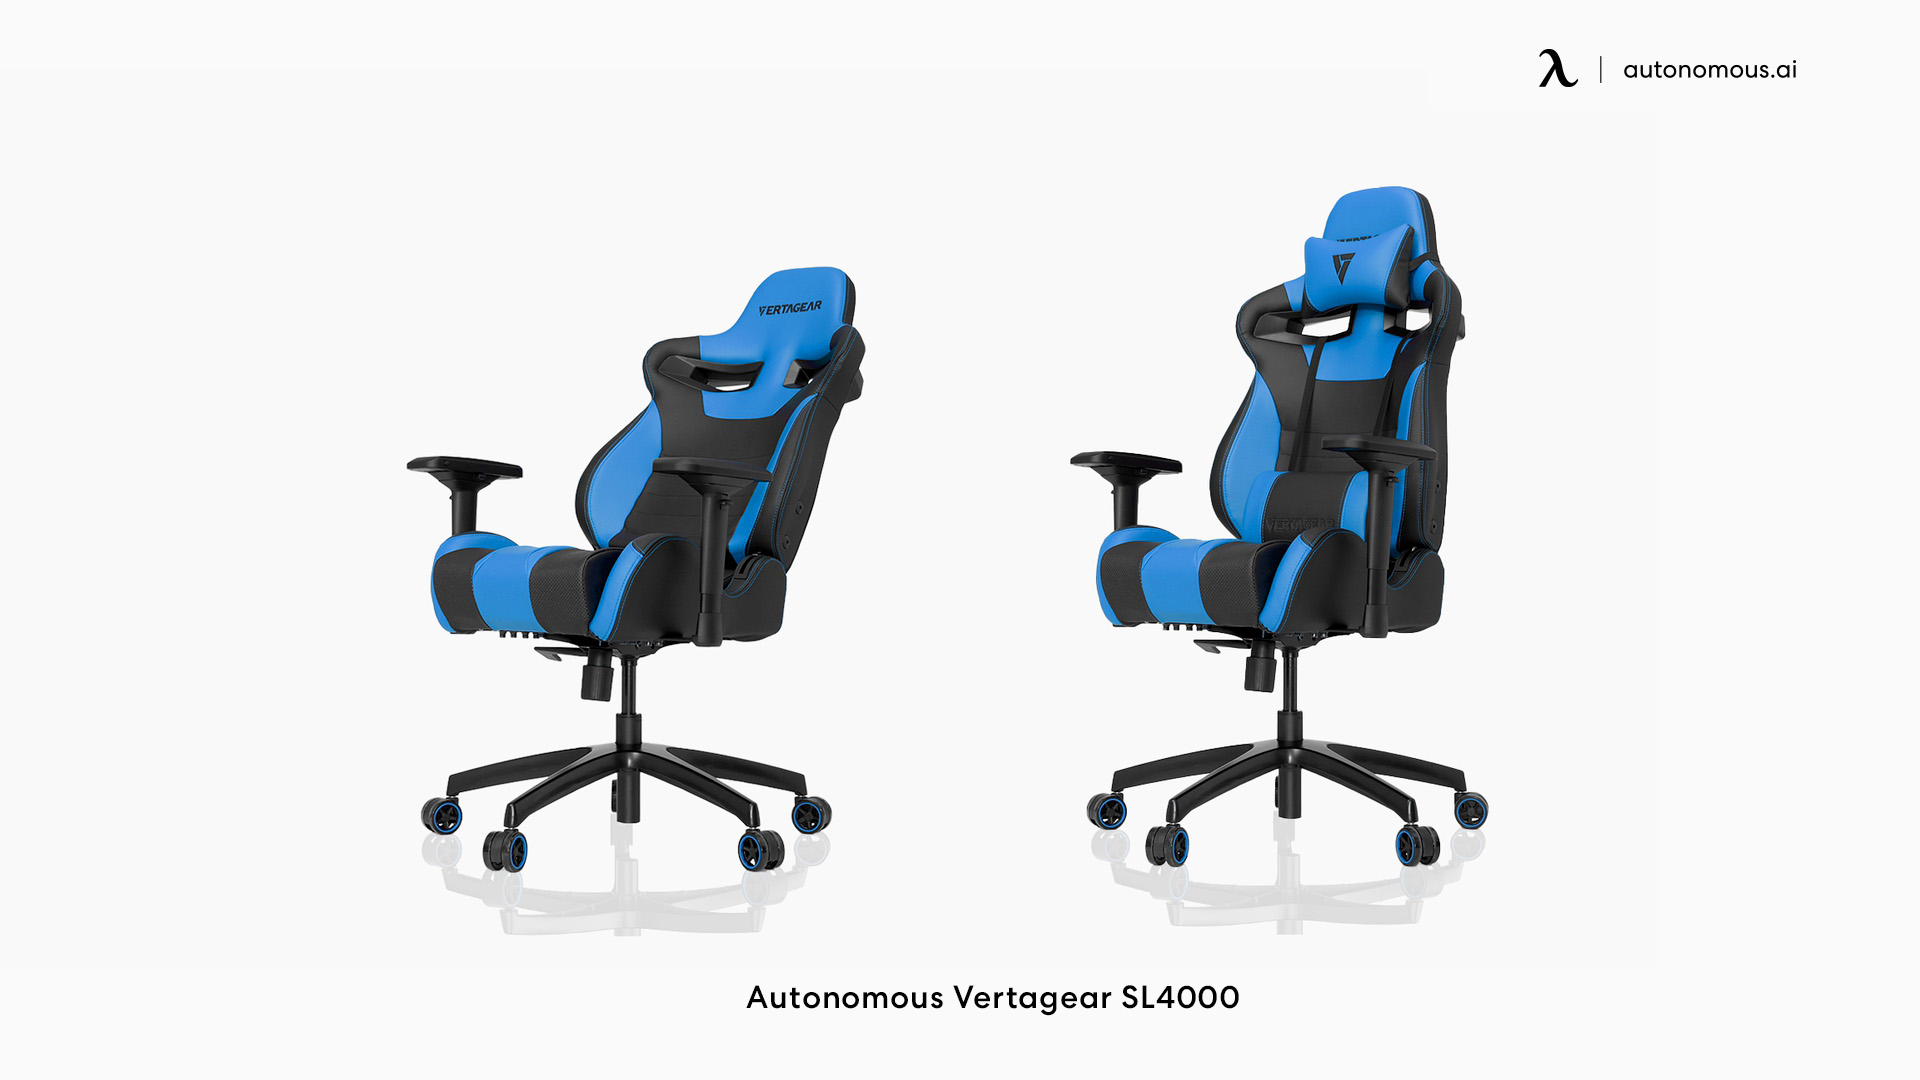 Vertagear SL4000 leather gaming chair